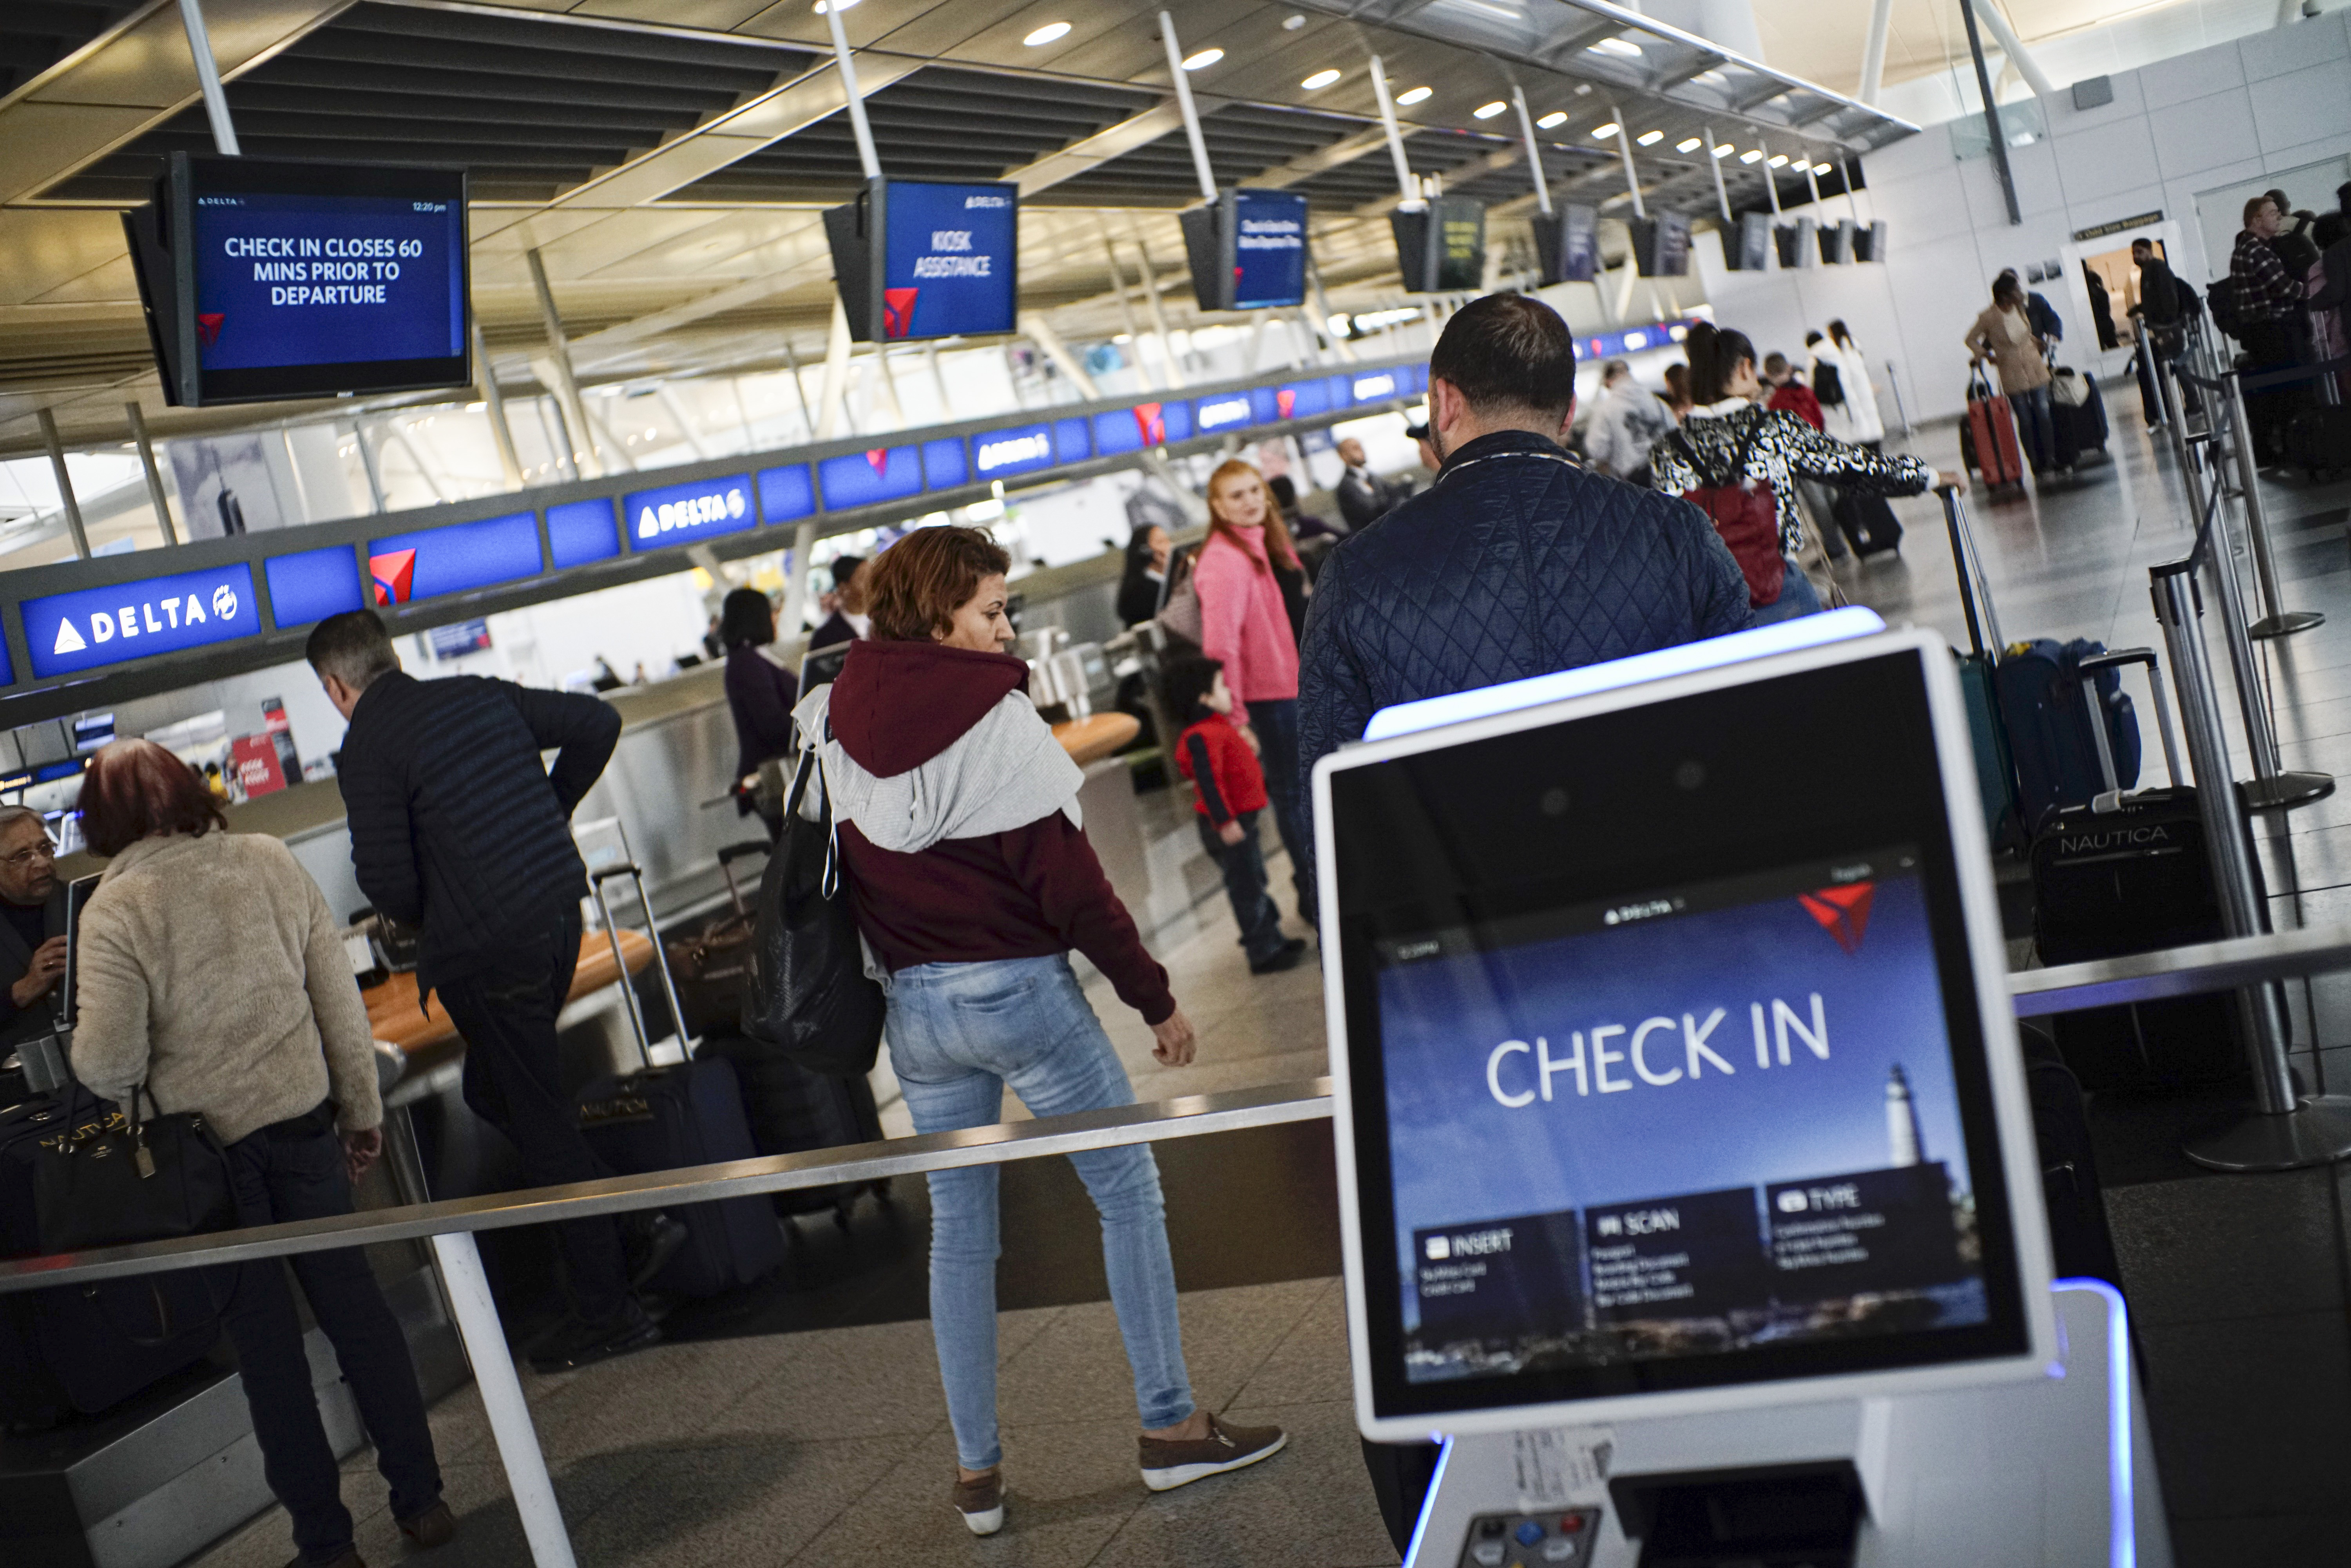 People check in at the Delta counter inside the John F. Kennedy International Airport in New York on Tuesday, March 3.